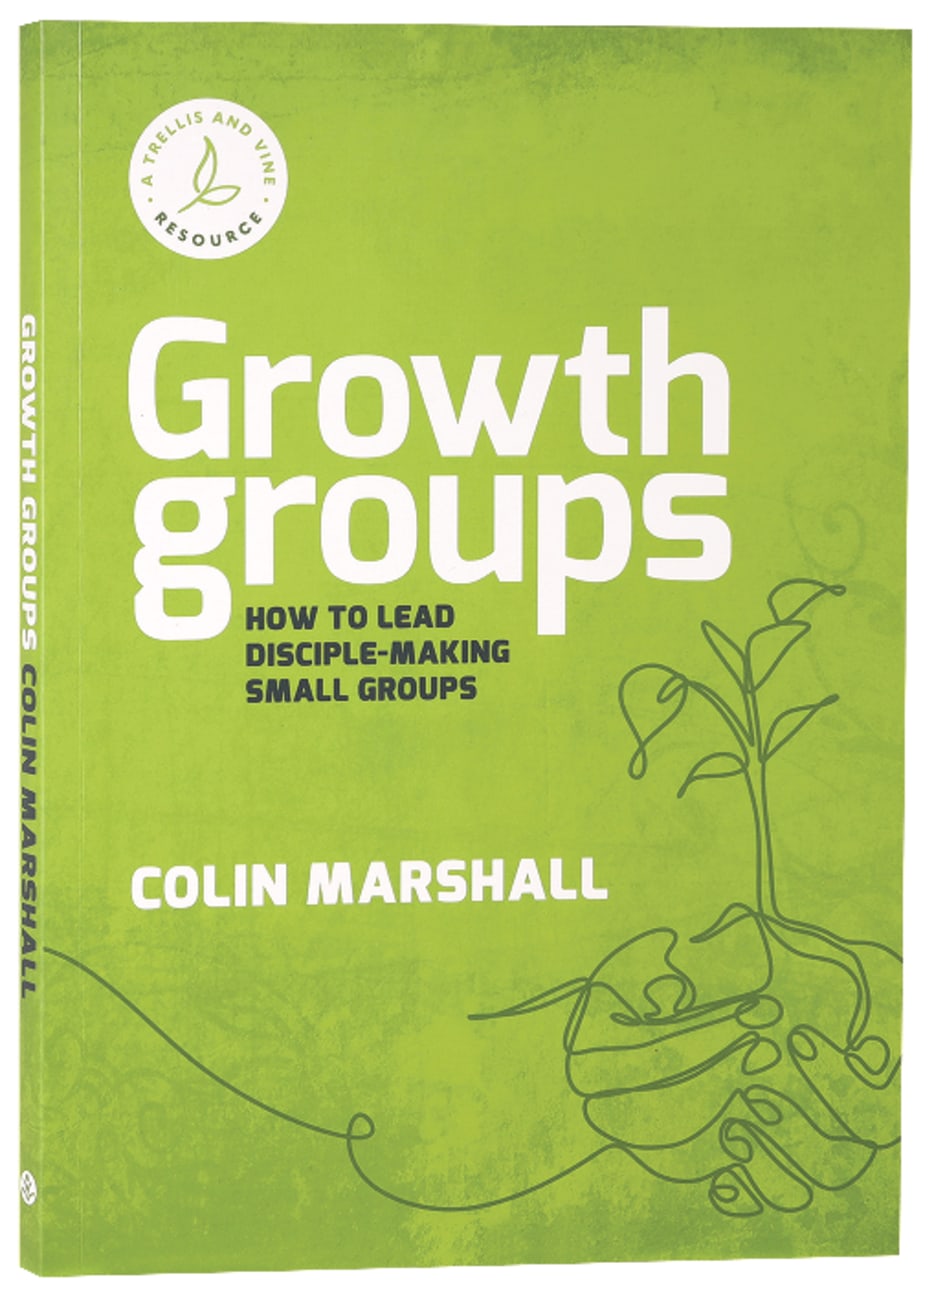 Growth Groups Manual: How to Lead Disciple-Making Small Groups Paperback